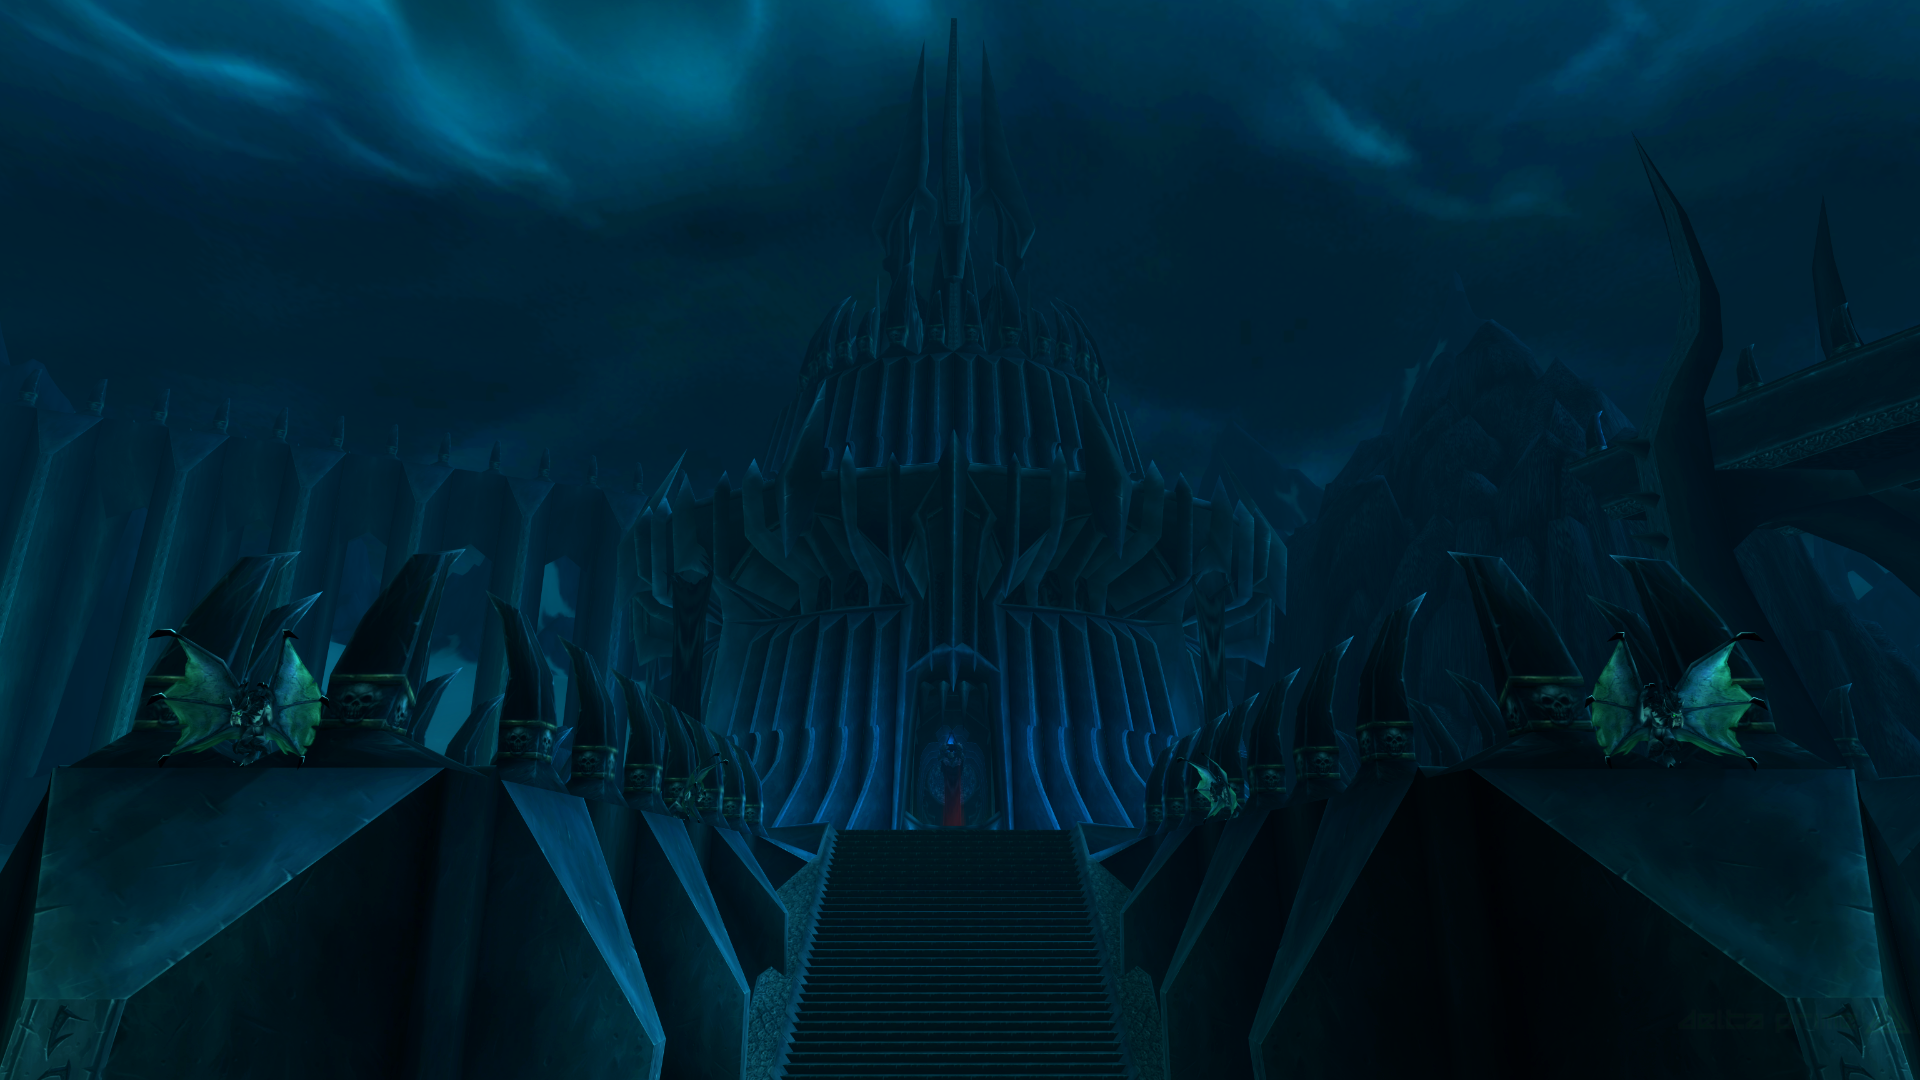 General 1920x1080 World of Warcraft: Wrath of the Lich King Icecrown Citadel screen shot PC gaming